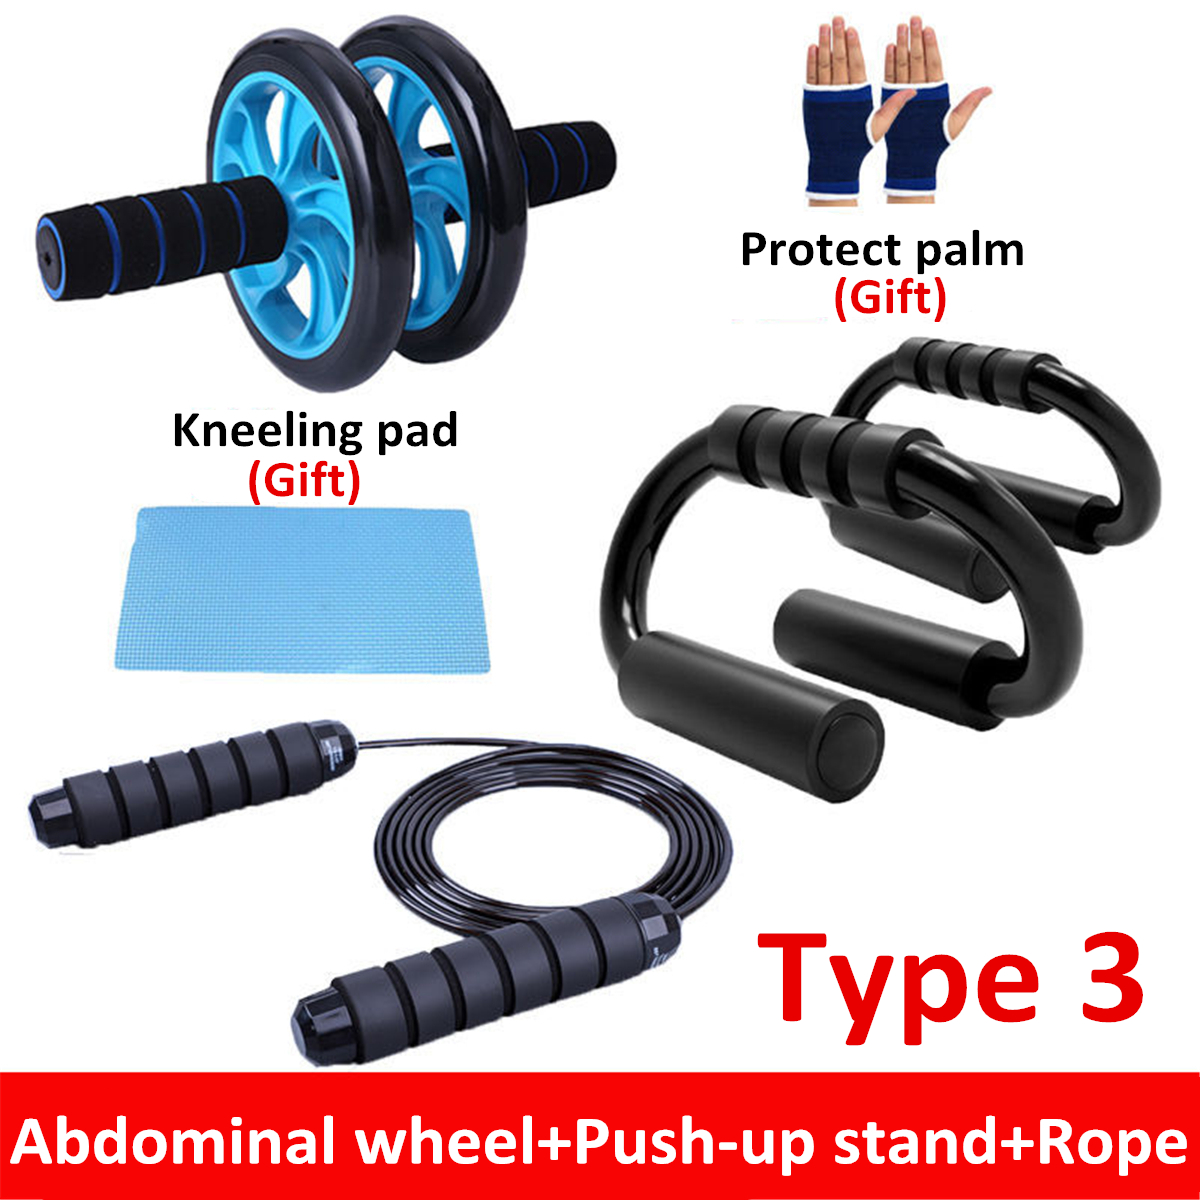 Home-Strength-Training-Fitness-Set-Abdominal-Wheel-Roller-Push-Up-Stand-Fitness-Gloves-Hand-Gripper--1667601-10